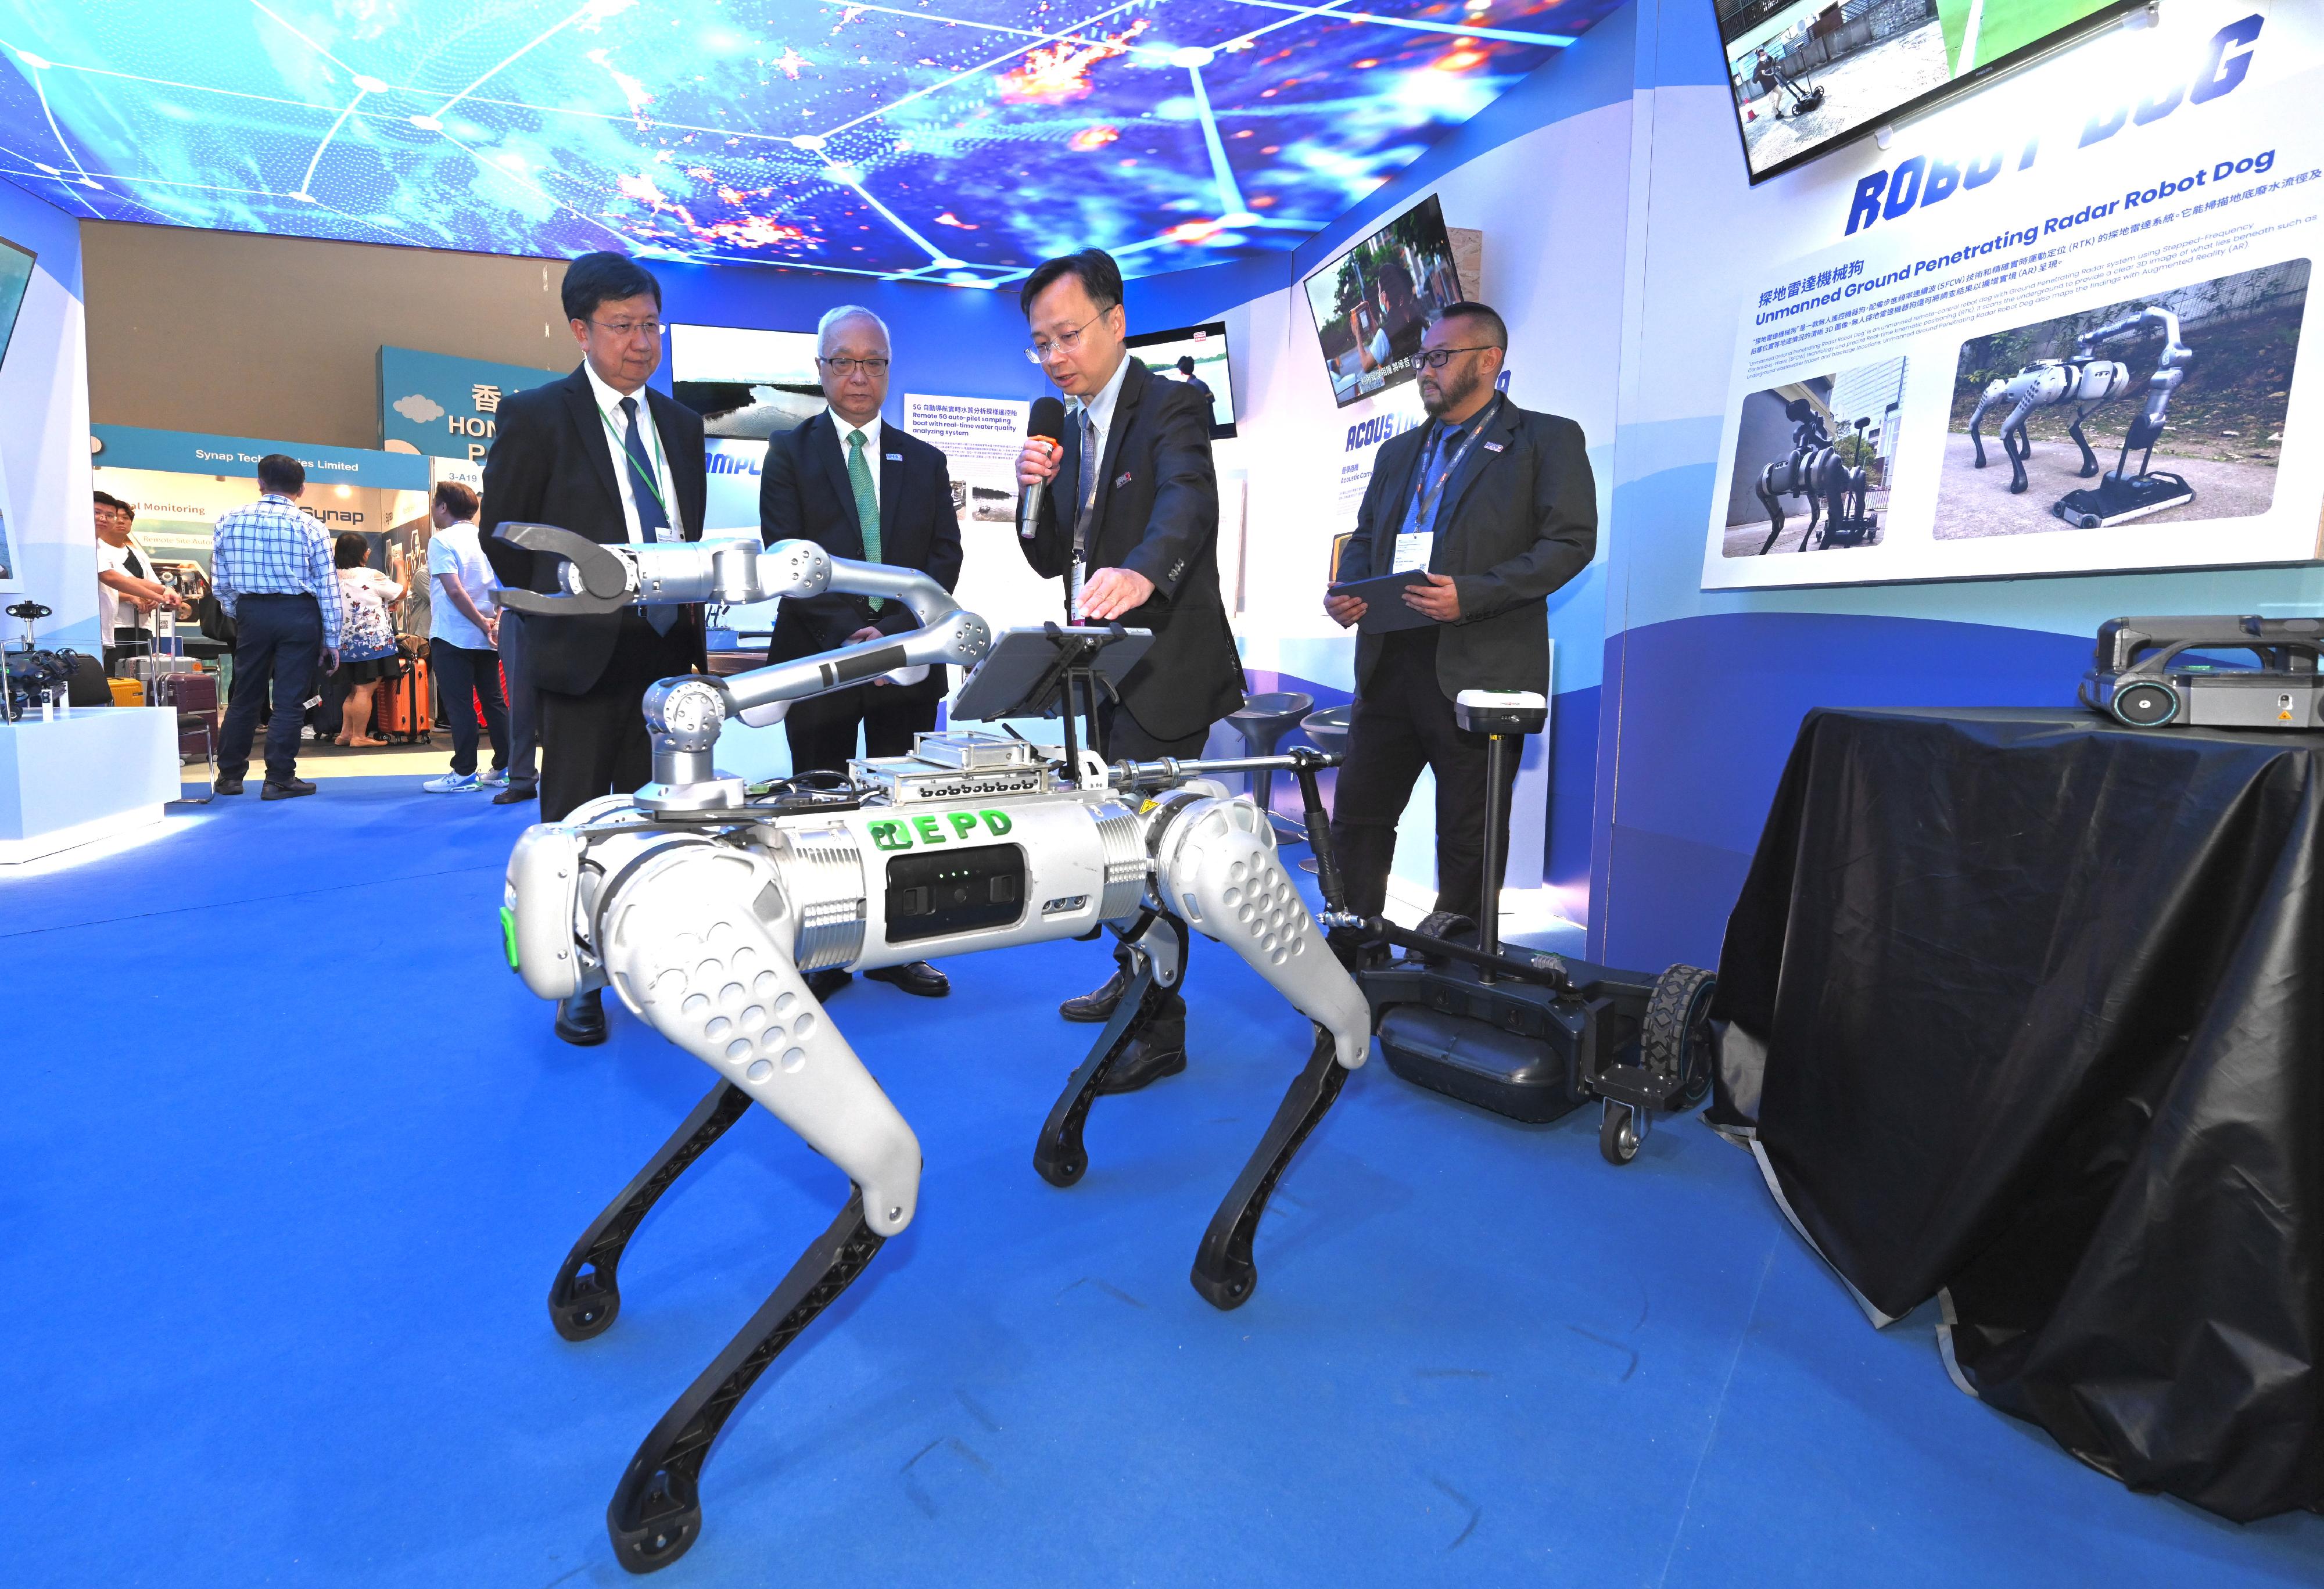 The Secretary for Environment and Ecology, Mr Tse Chin-wan (second left), visits the physical exhibition held by the Environment and Ecology Bureau at the 18th Eco Expo Asia today (October 26) and is briefed on the operation of an unmanned ground penetrating radar robot dog at the "GreenTech" zone.